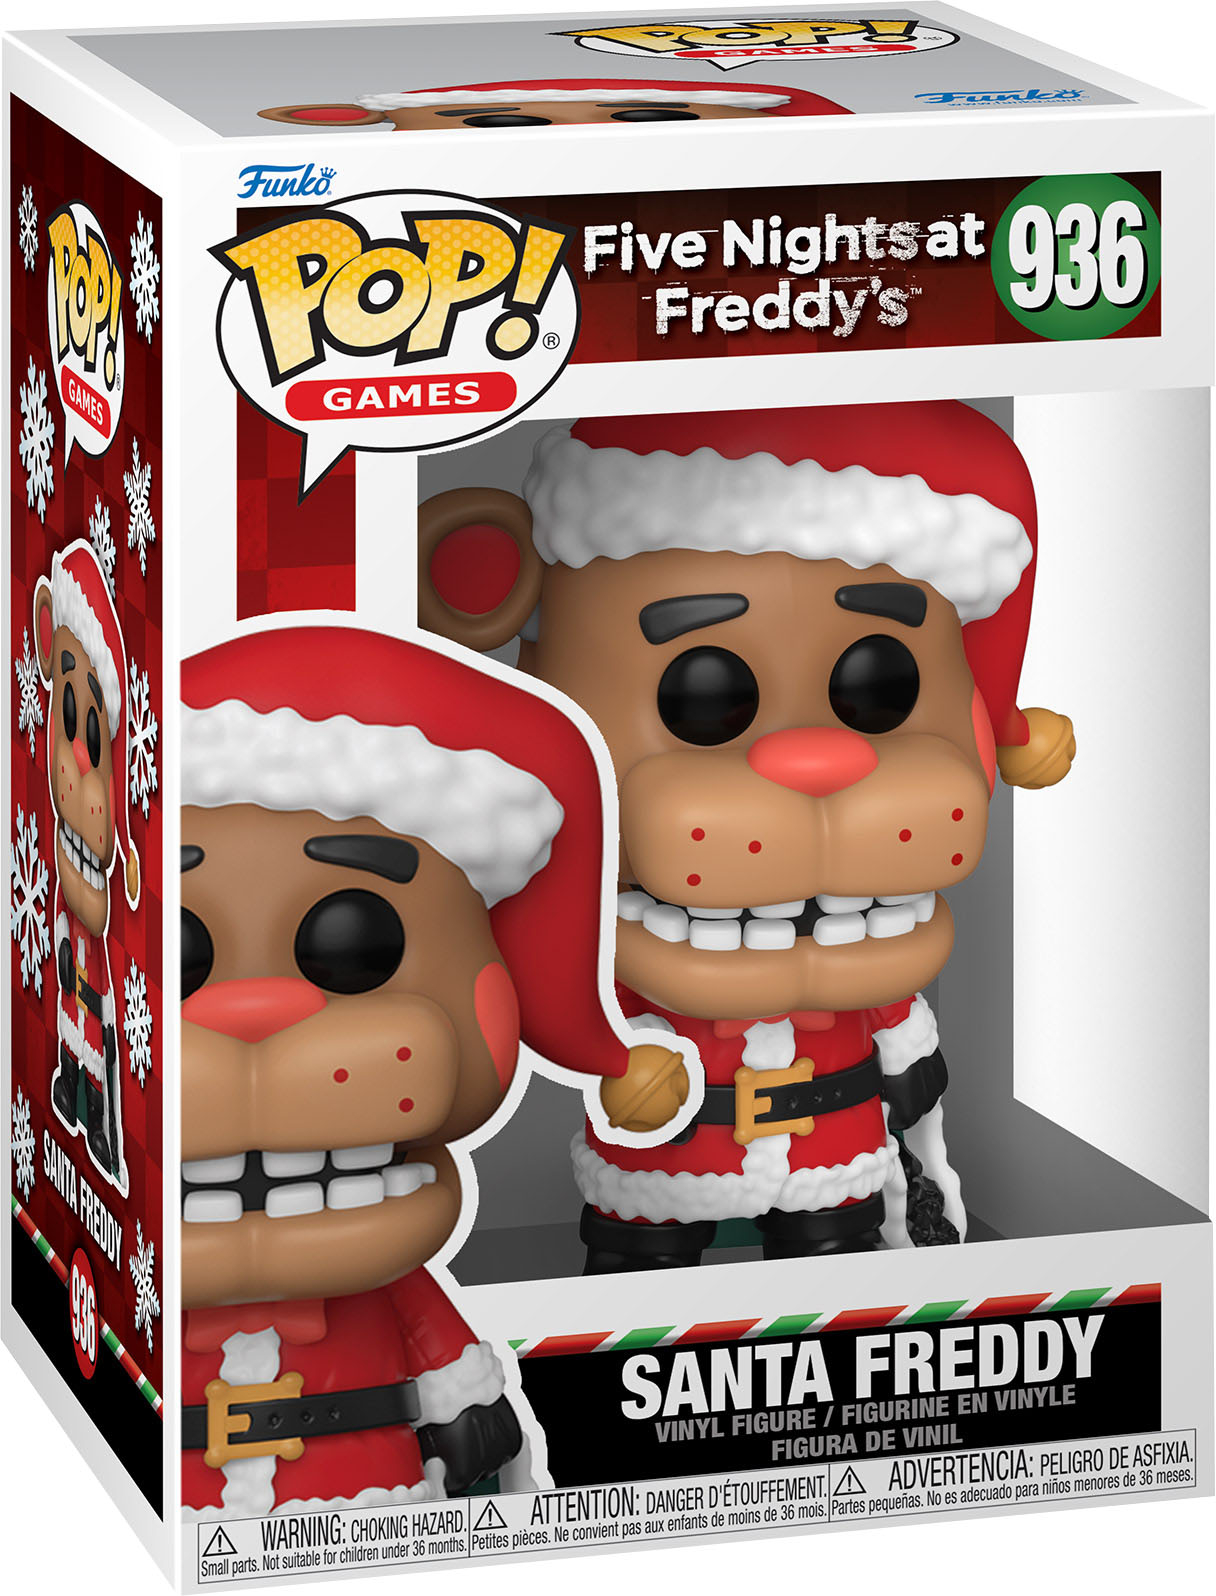 Funko POP! Five Nights at Freddy's Collectors Set with Freddy, Bonnie and  Chica